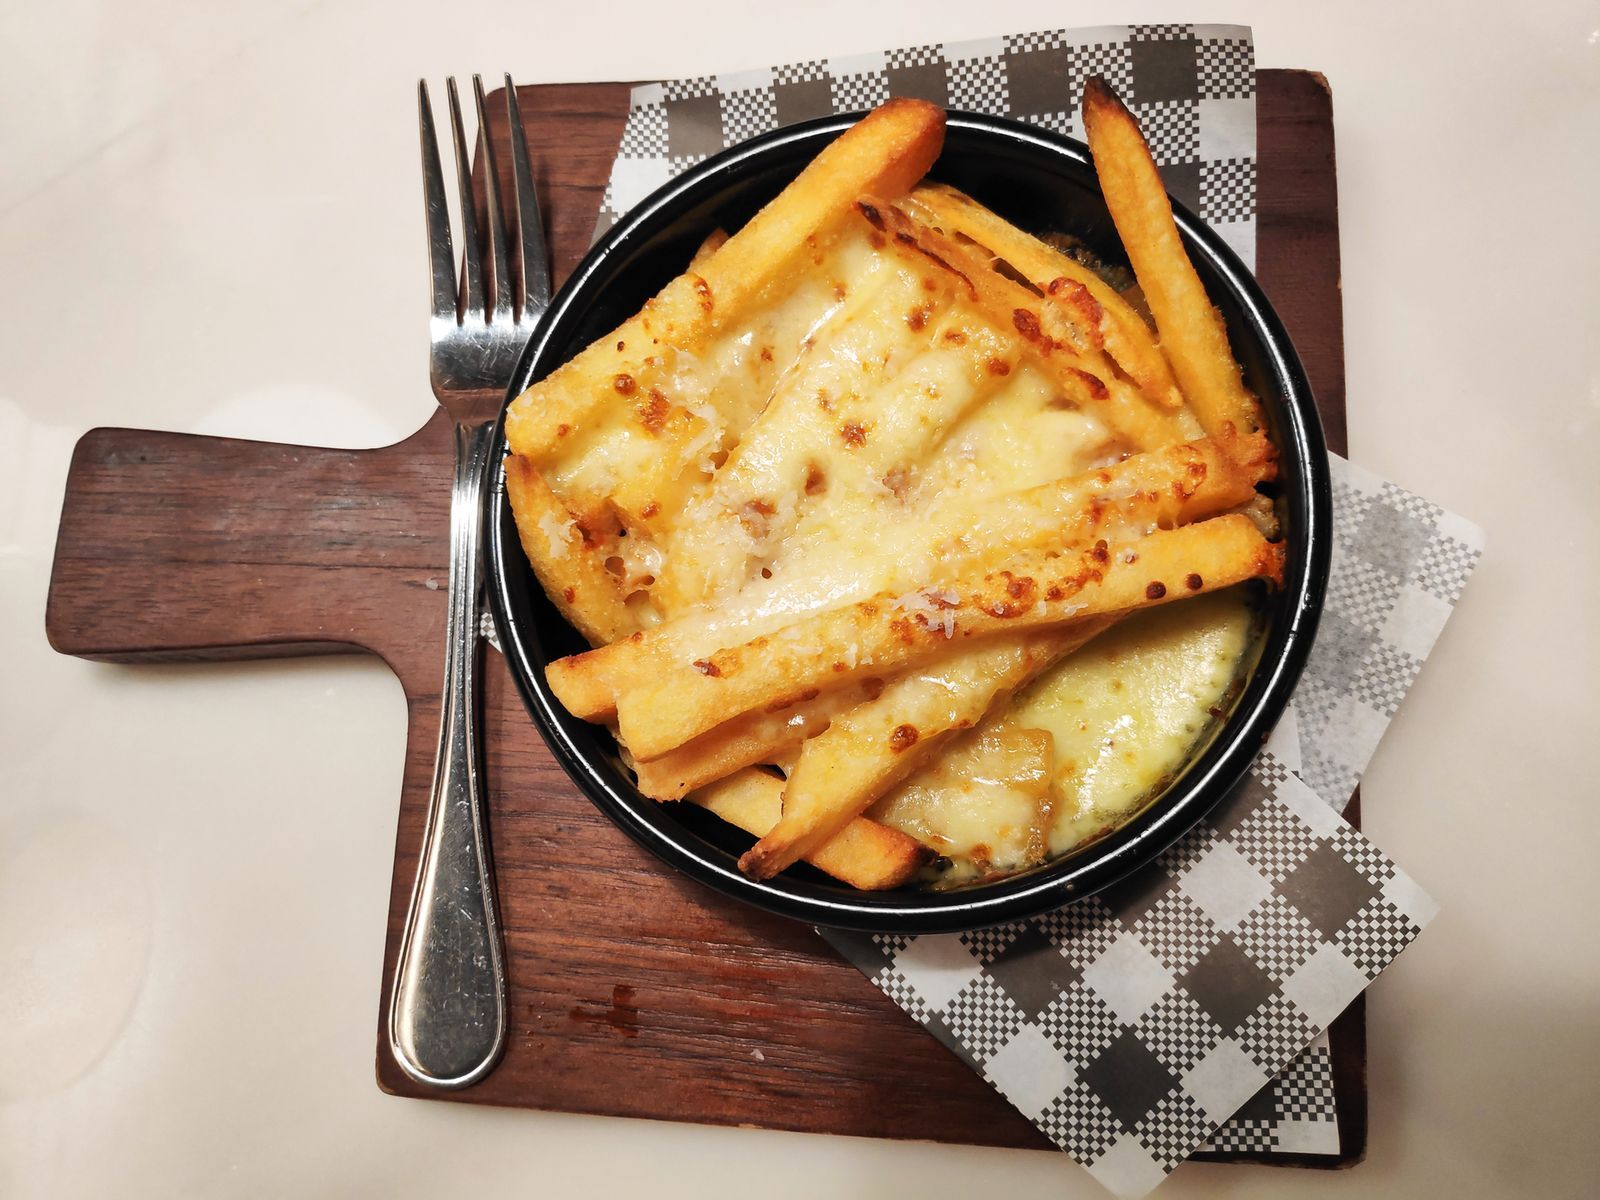 <p>In France, baked potatoes are usually topped with raclette cheese, but substituting <a href="https://www.metro.ca/en/recipes-occasions/recipes/canadian-raclette-and-potato-casserole">fried potatoes</a> is just as delicious!</p>